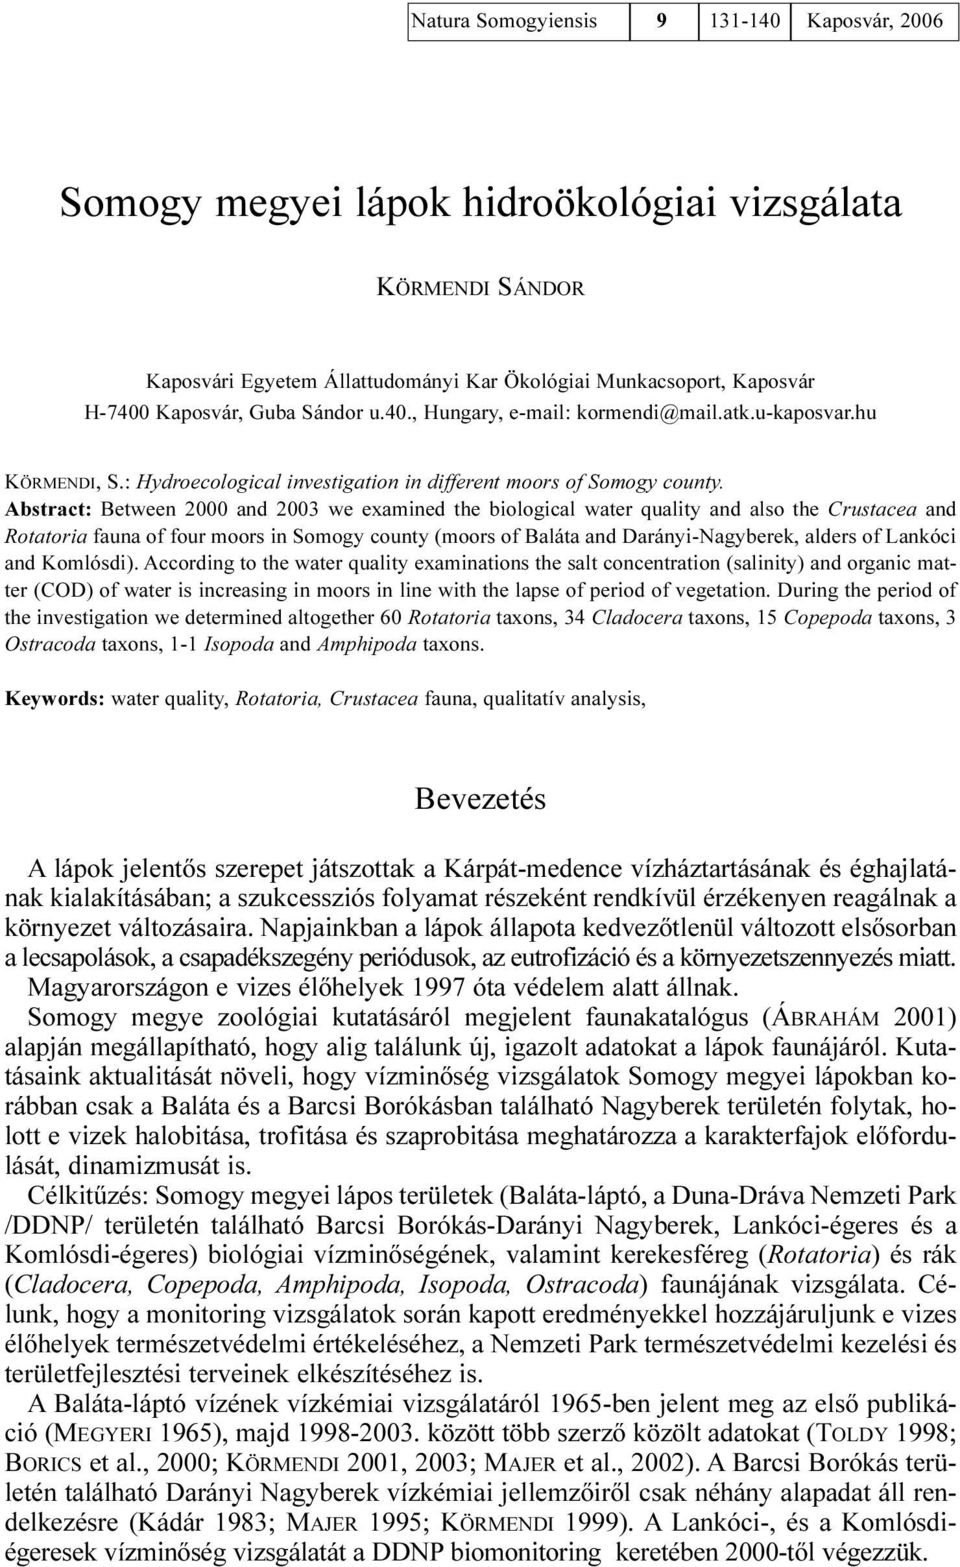 Abstract: Between 2000 and 2003 we examined the biological water quality and also the Crustacea and Rotatoria fauna of four moors in Somogy county (moors of Baláta and Darányi-Nagyberek, alders of